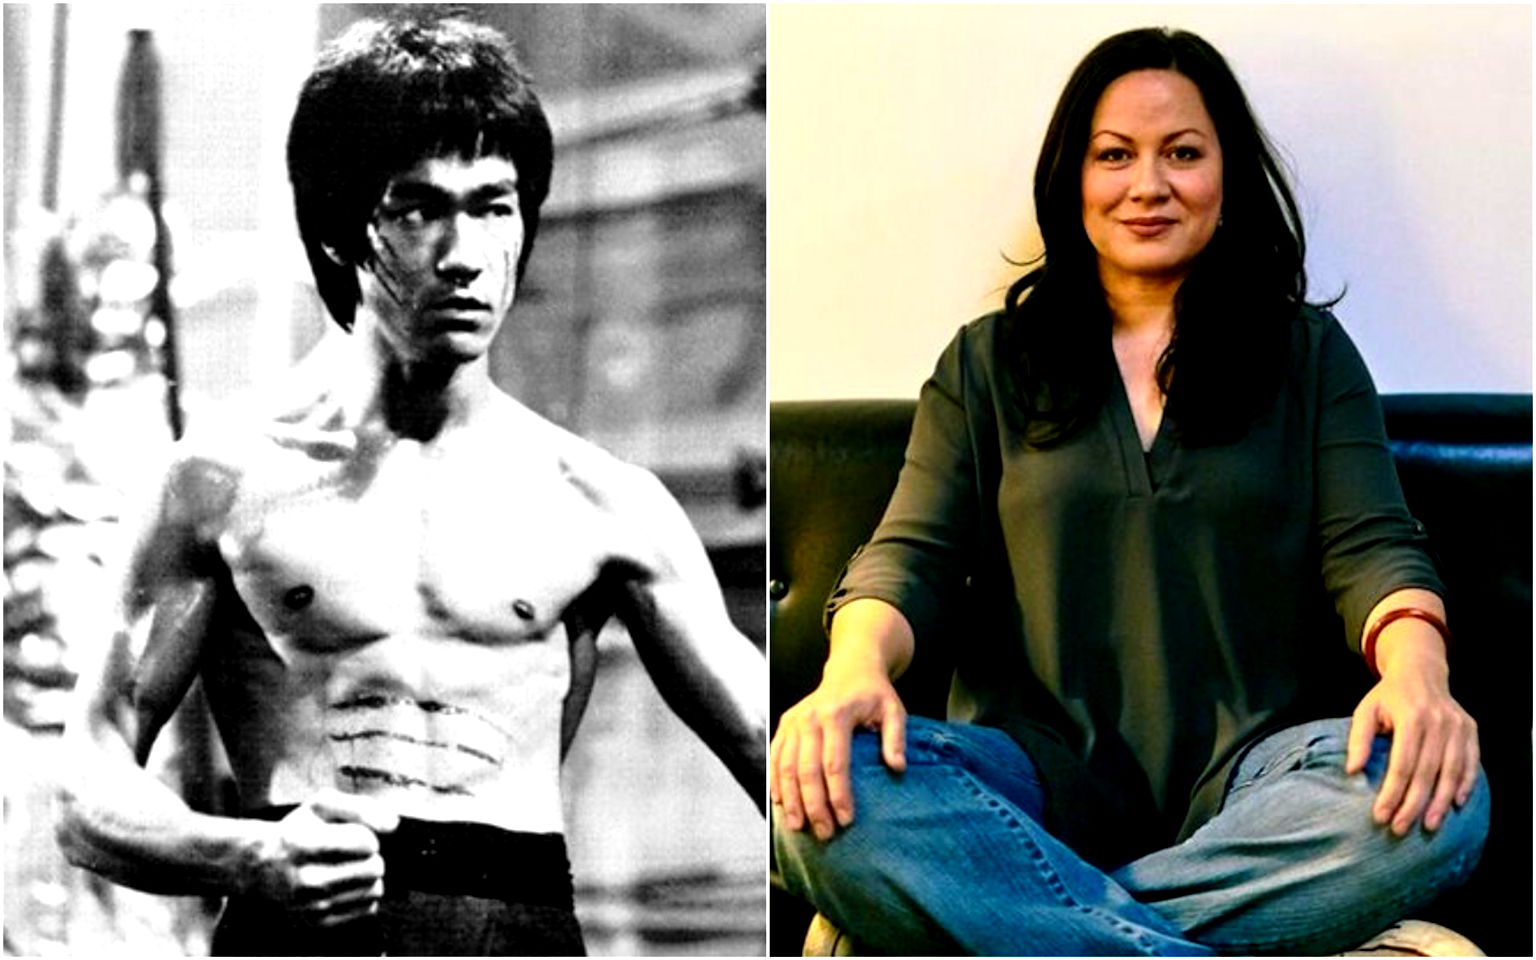 Bruce Lee Once Had a Dream That Hollywood Destroyed, Now His Daughter is Bringing it Back to Life